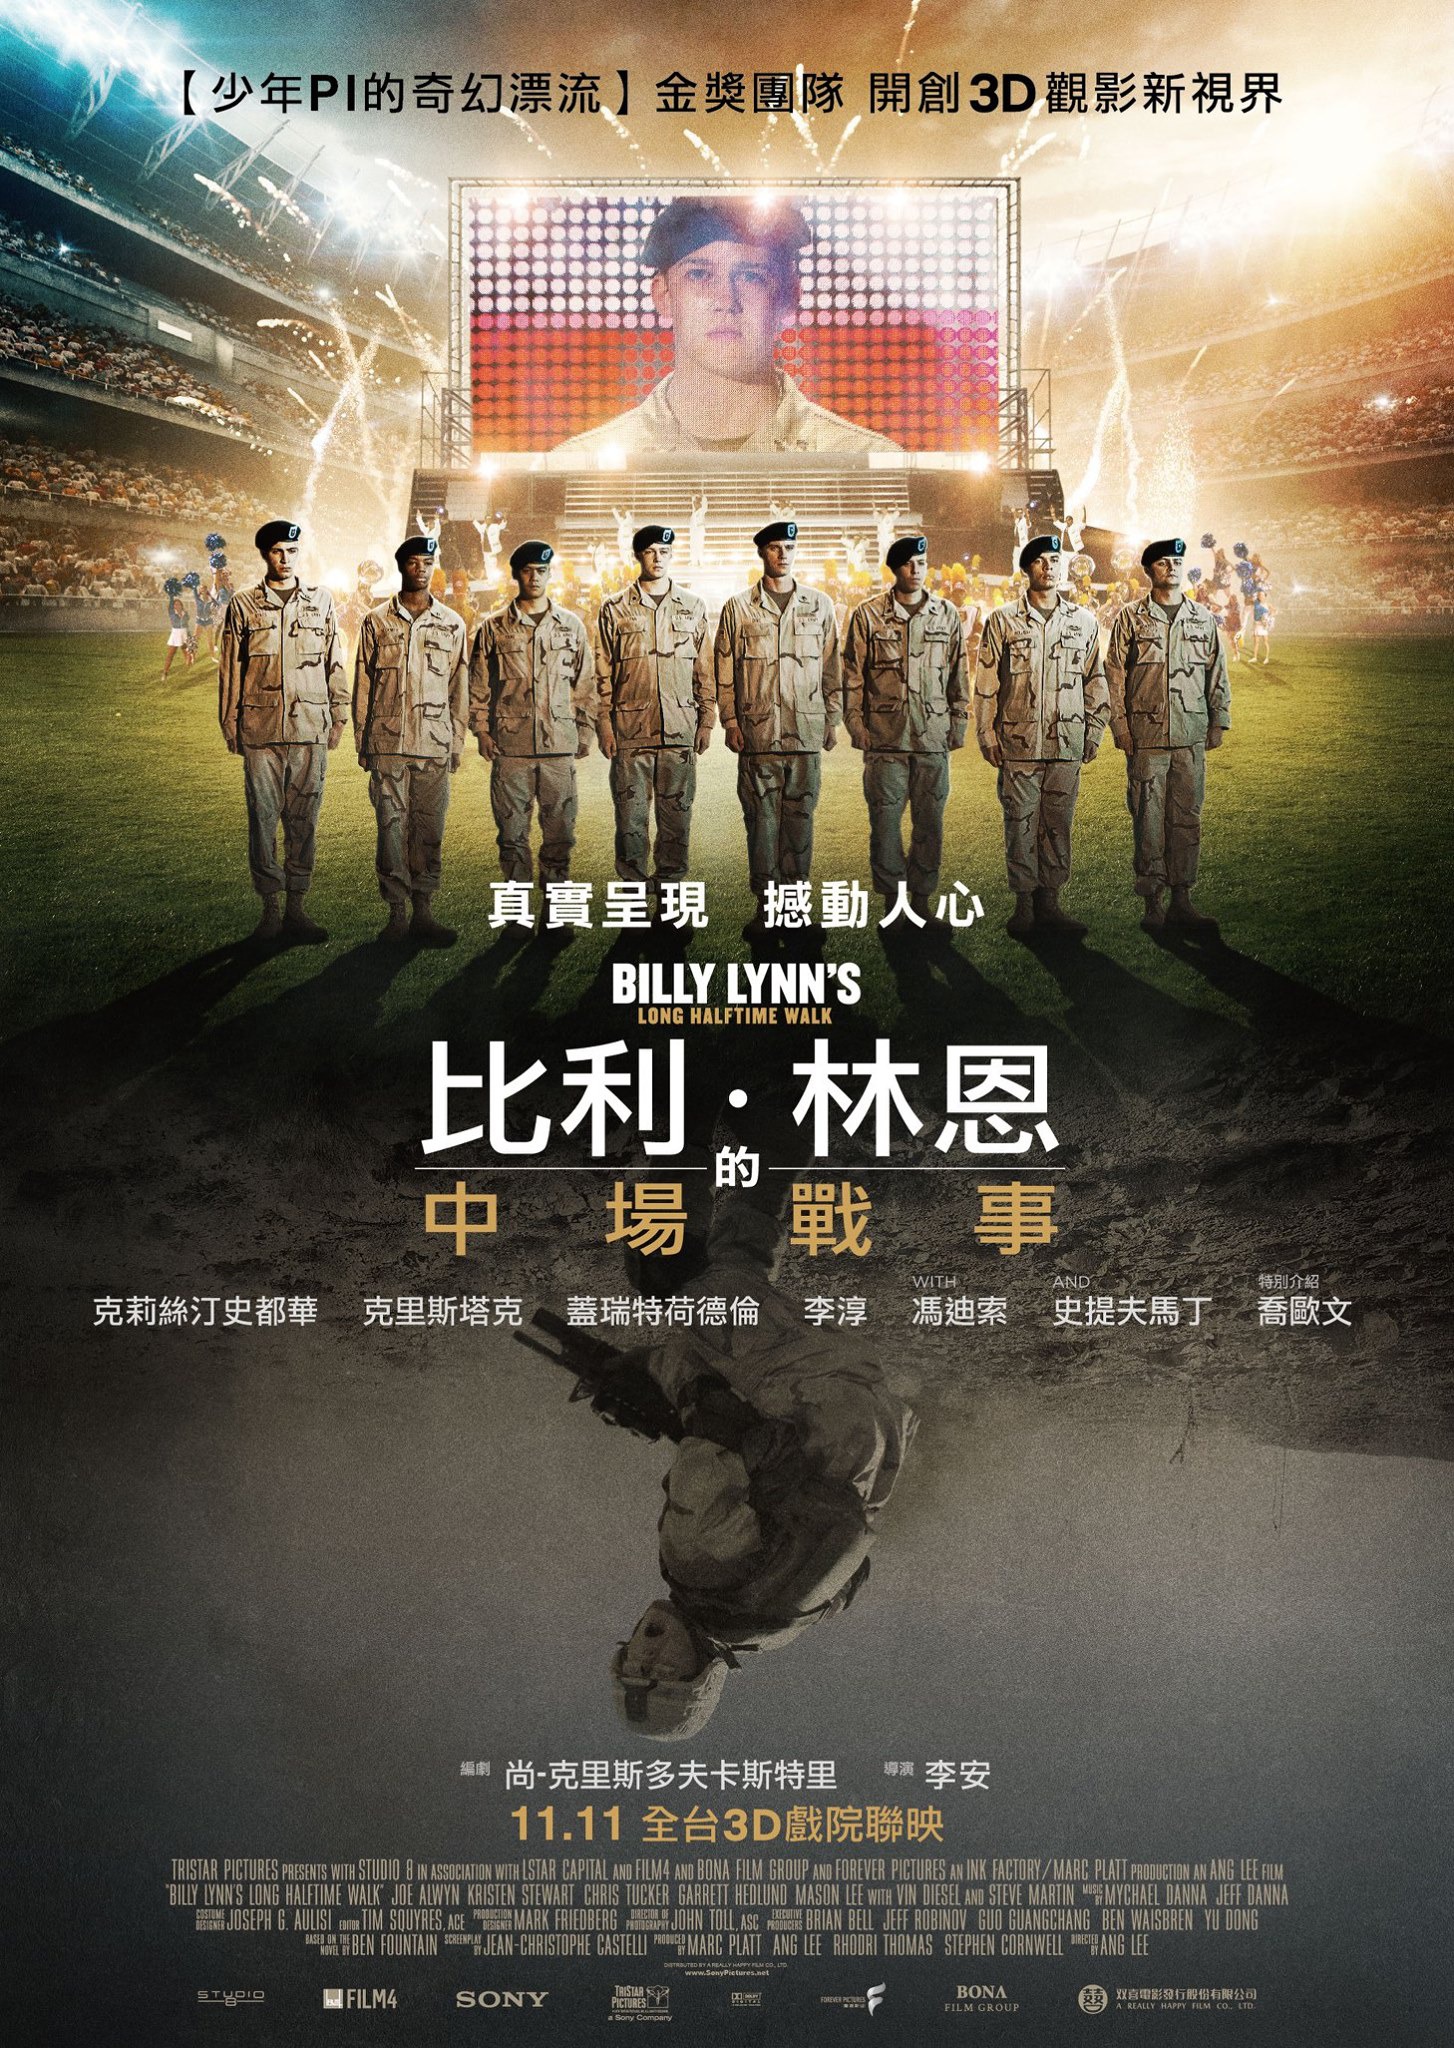 Mega Sized Movie Poster Image for Billy Lynn's Long Halftime Walk (#2 of 3)